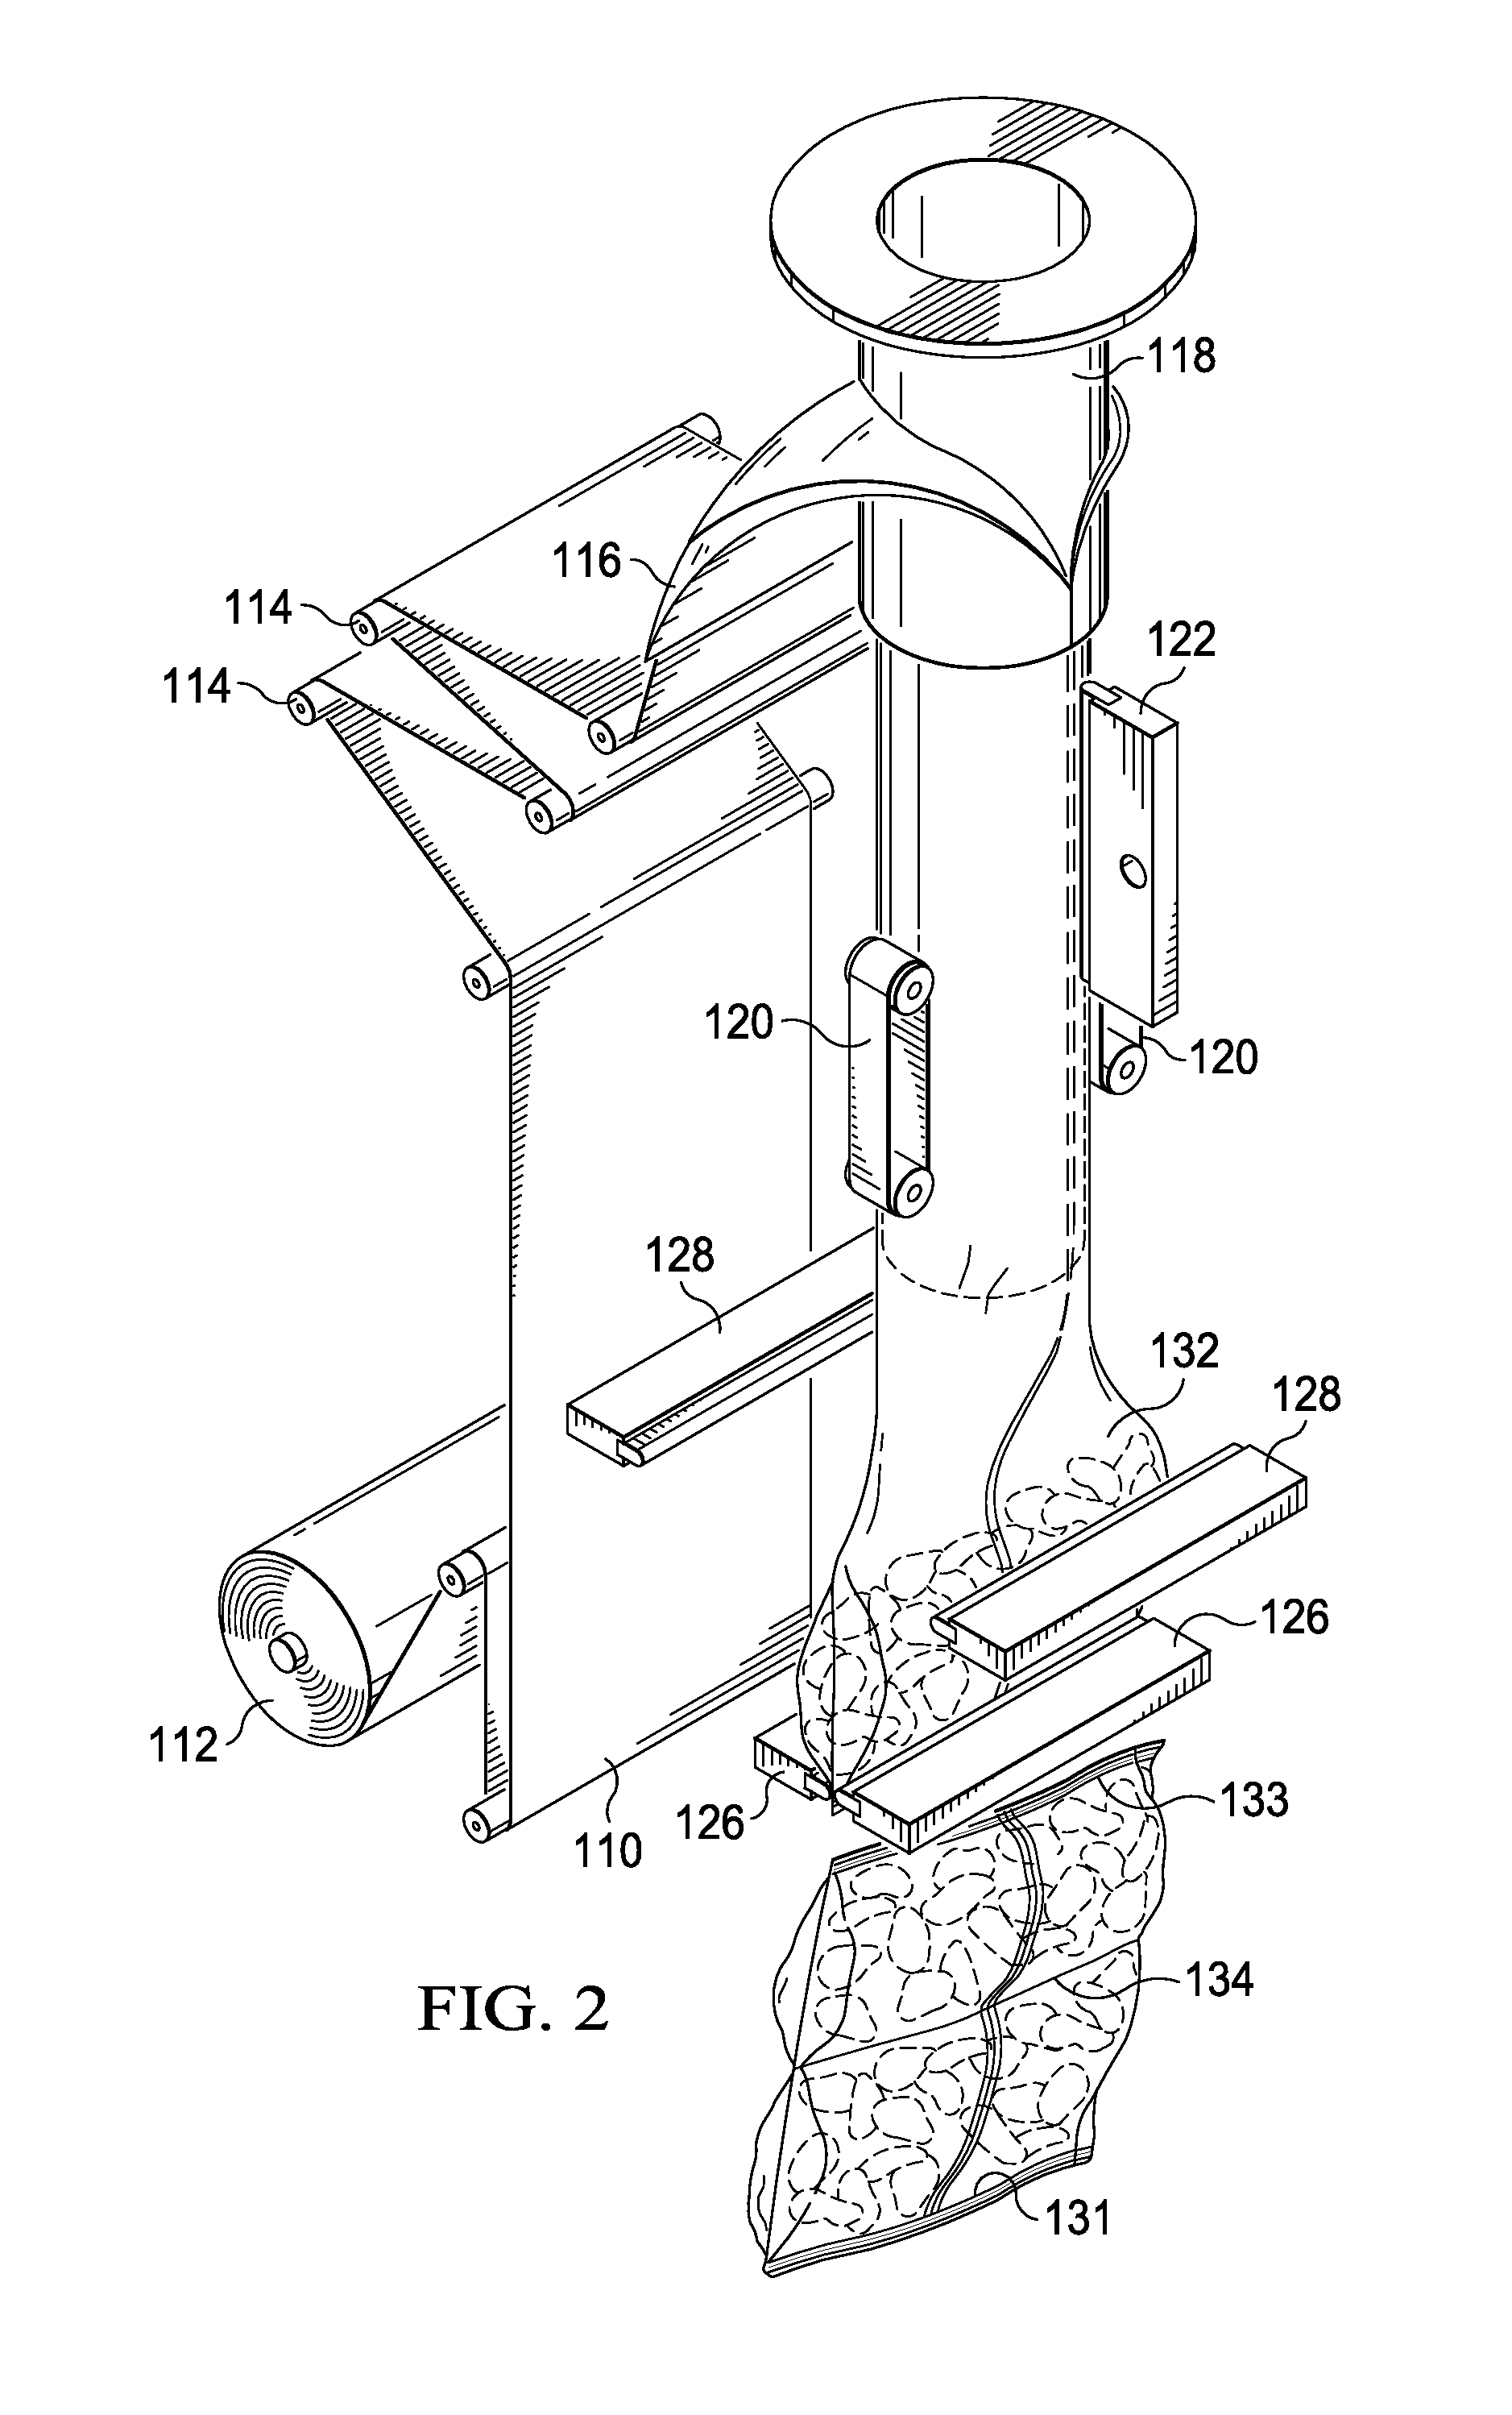 Method and apparatus for producing multi-compartment packages